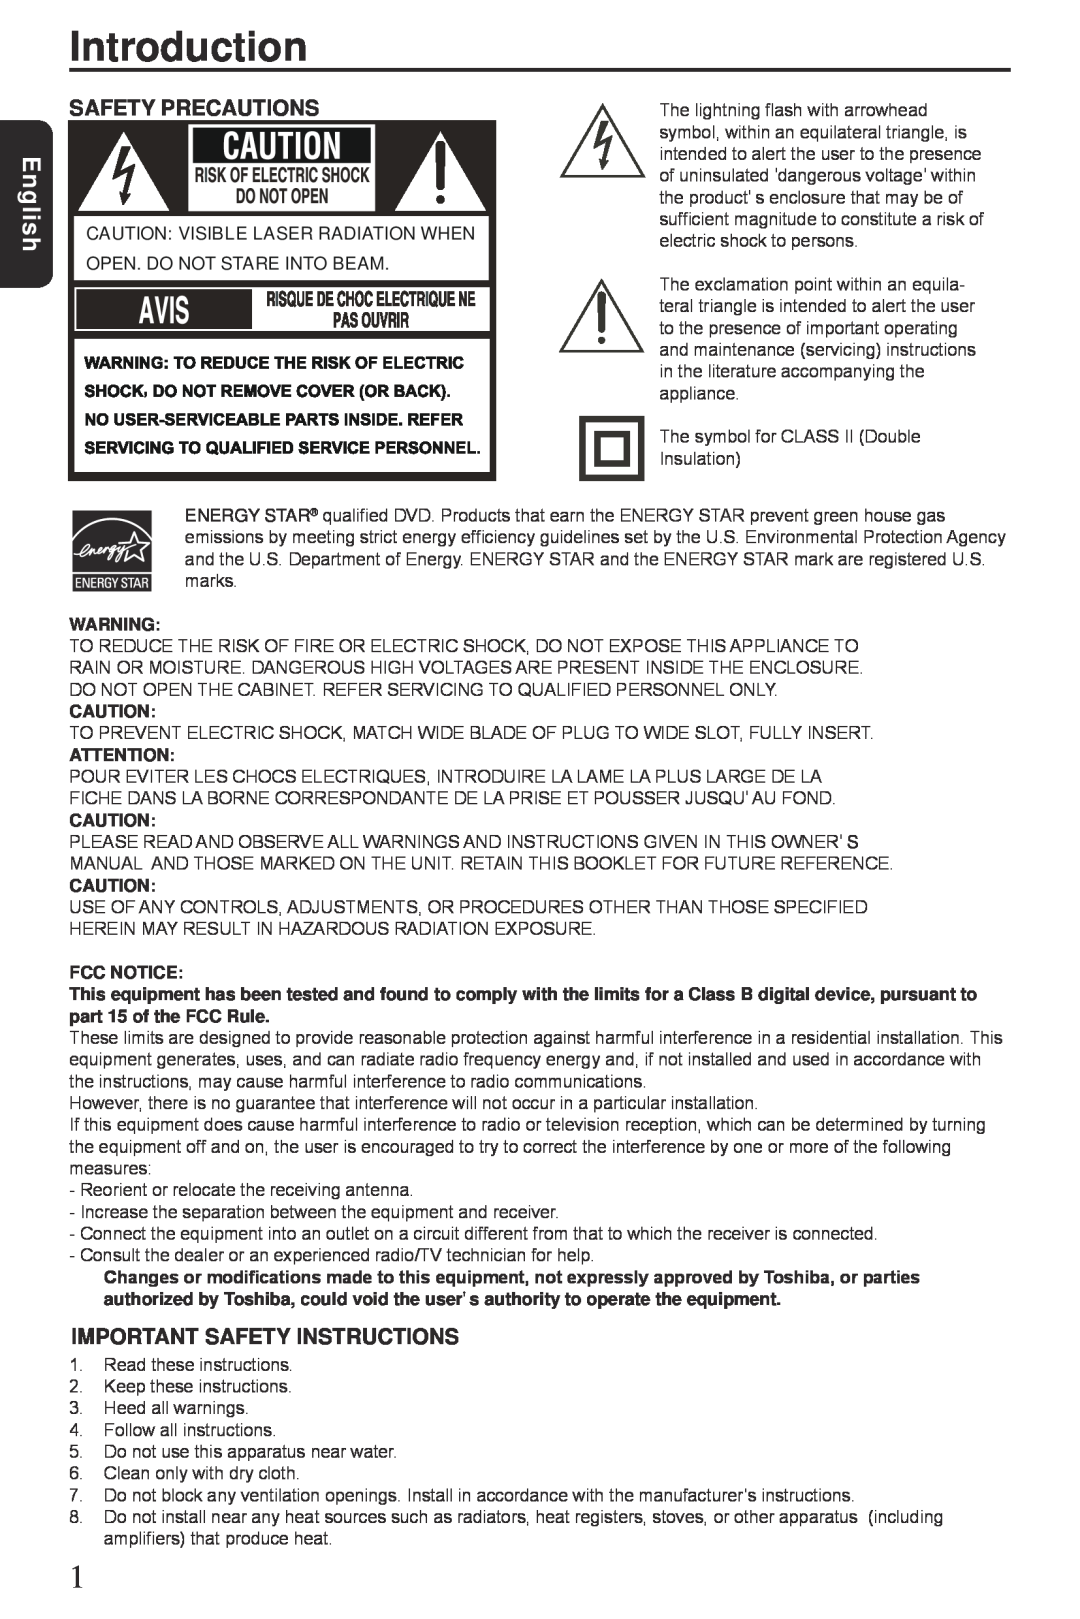 Toshiba SD3300 manual Introduction, English, Caution Visible Laser Radiation When Open. Do Not Stare Into Beam, Fcc Notice 